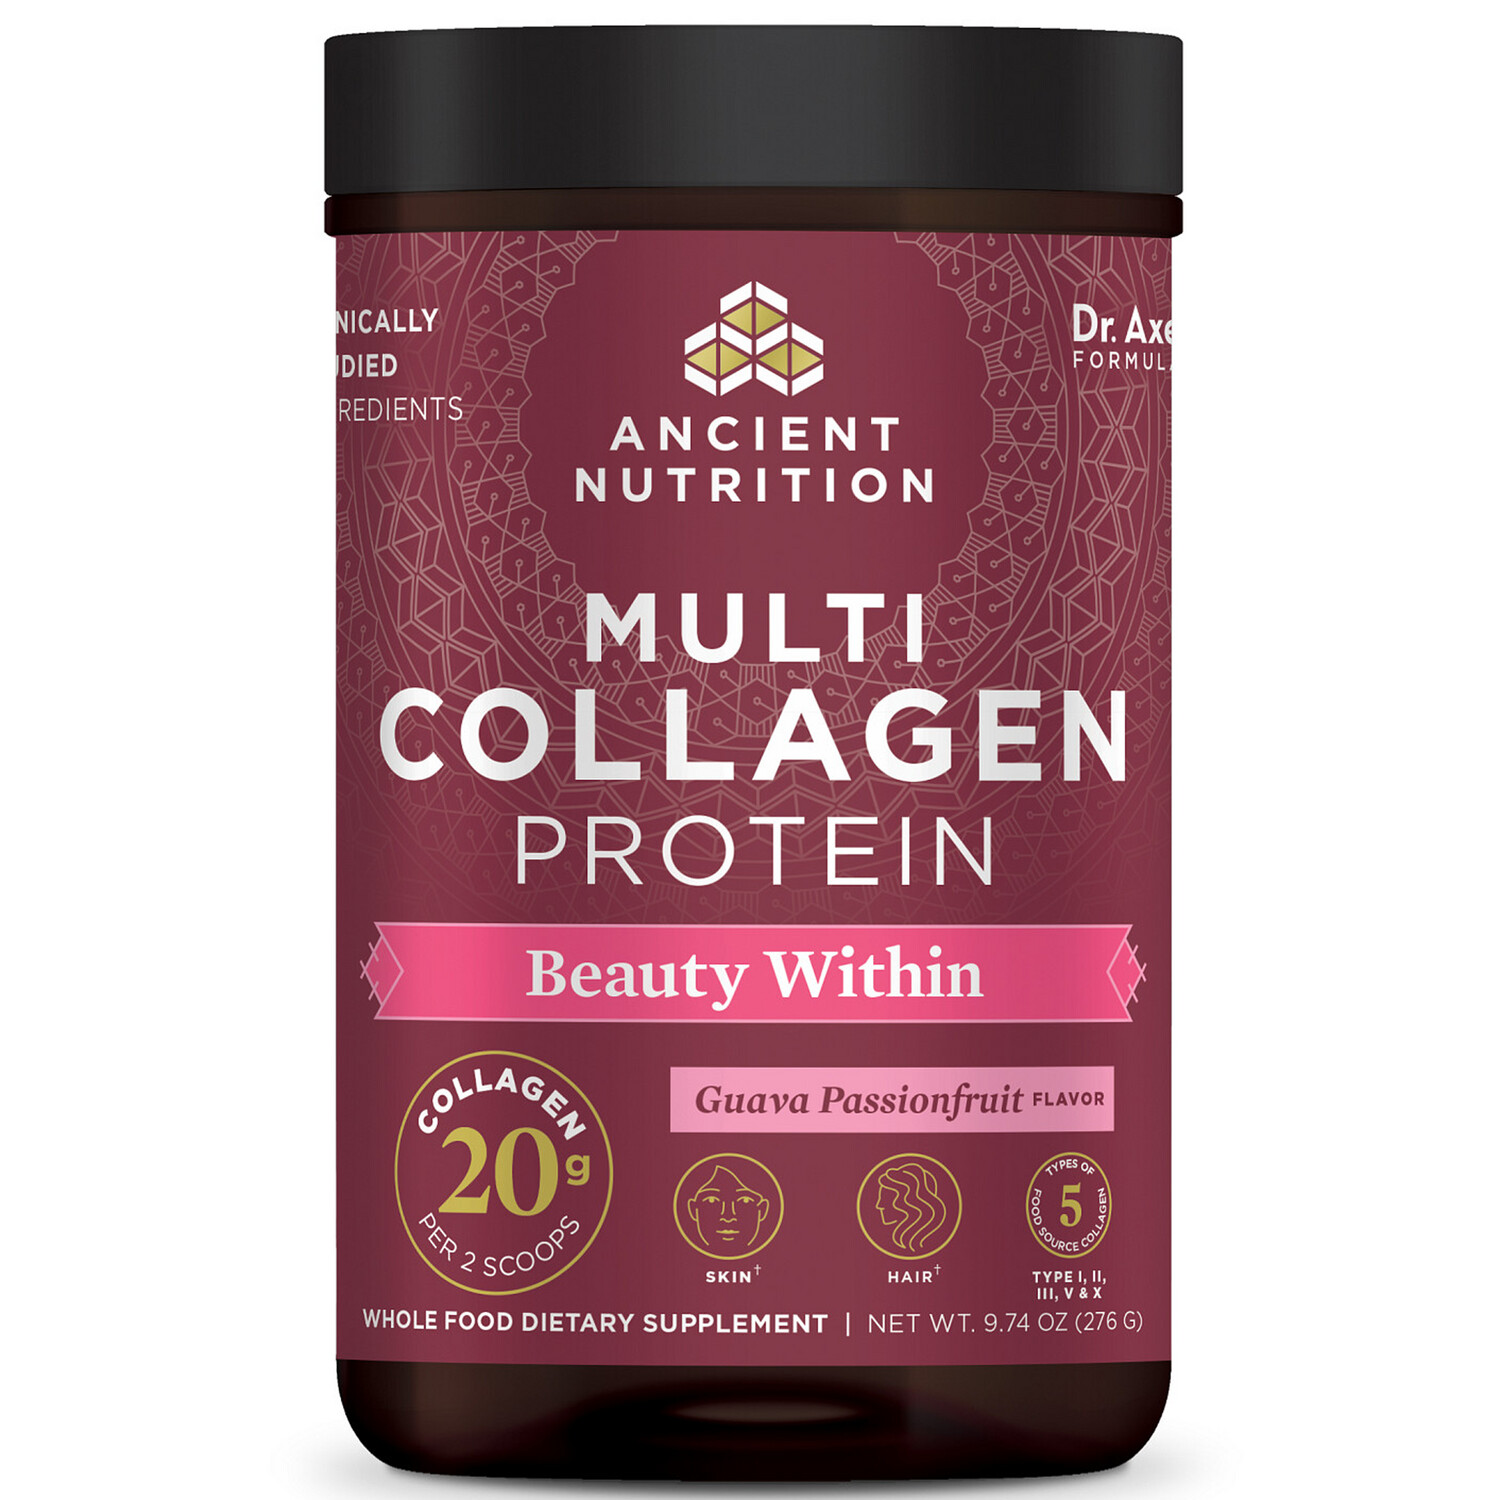 Multi Collagen Protein SINGLE SERVING PACKET